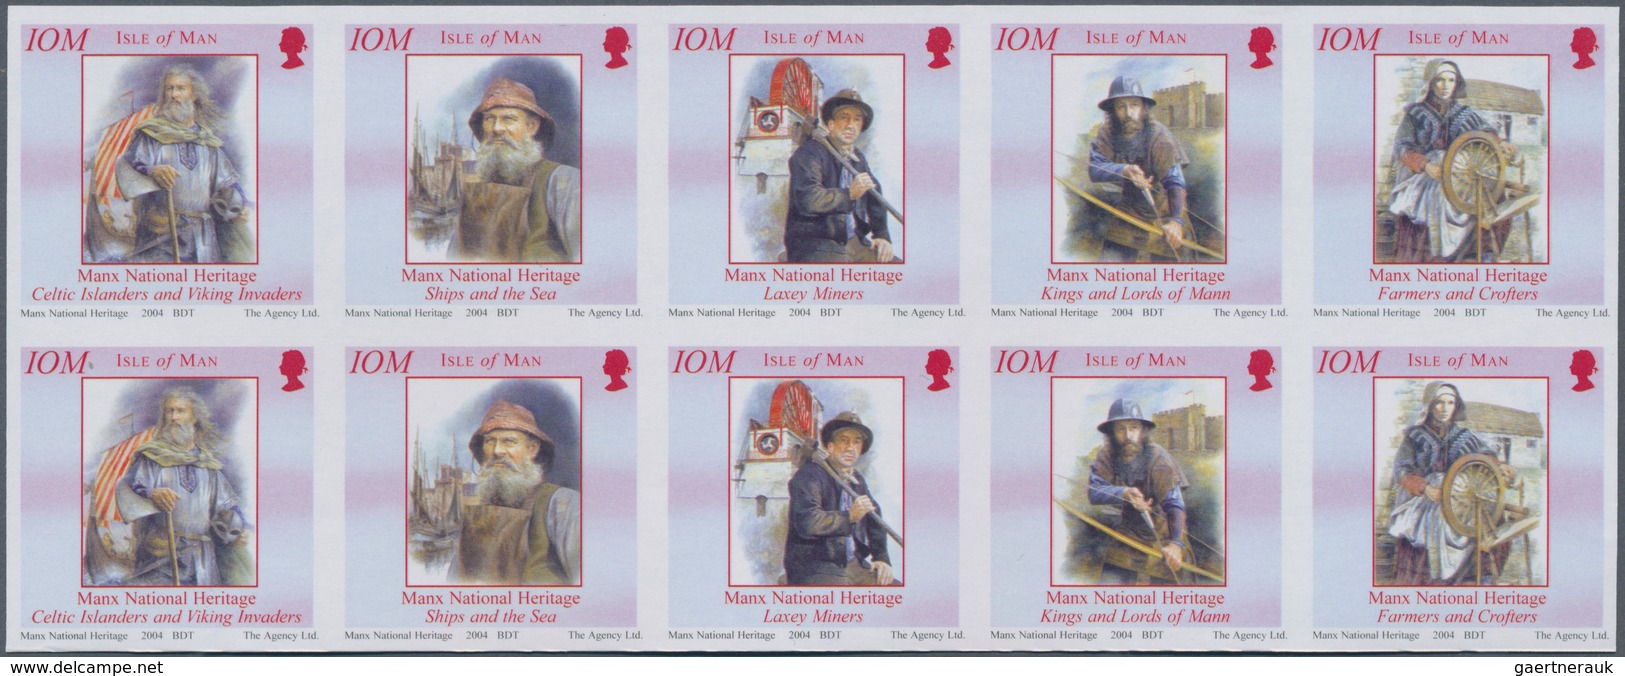 Großbritannien - Isle Of Man: 2004. Imperforate Booklet Pane (2 Times 5 Stamps) For The Stamp Bookle - Man (Eiland)